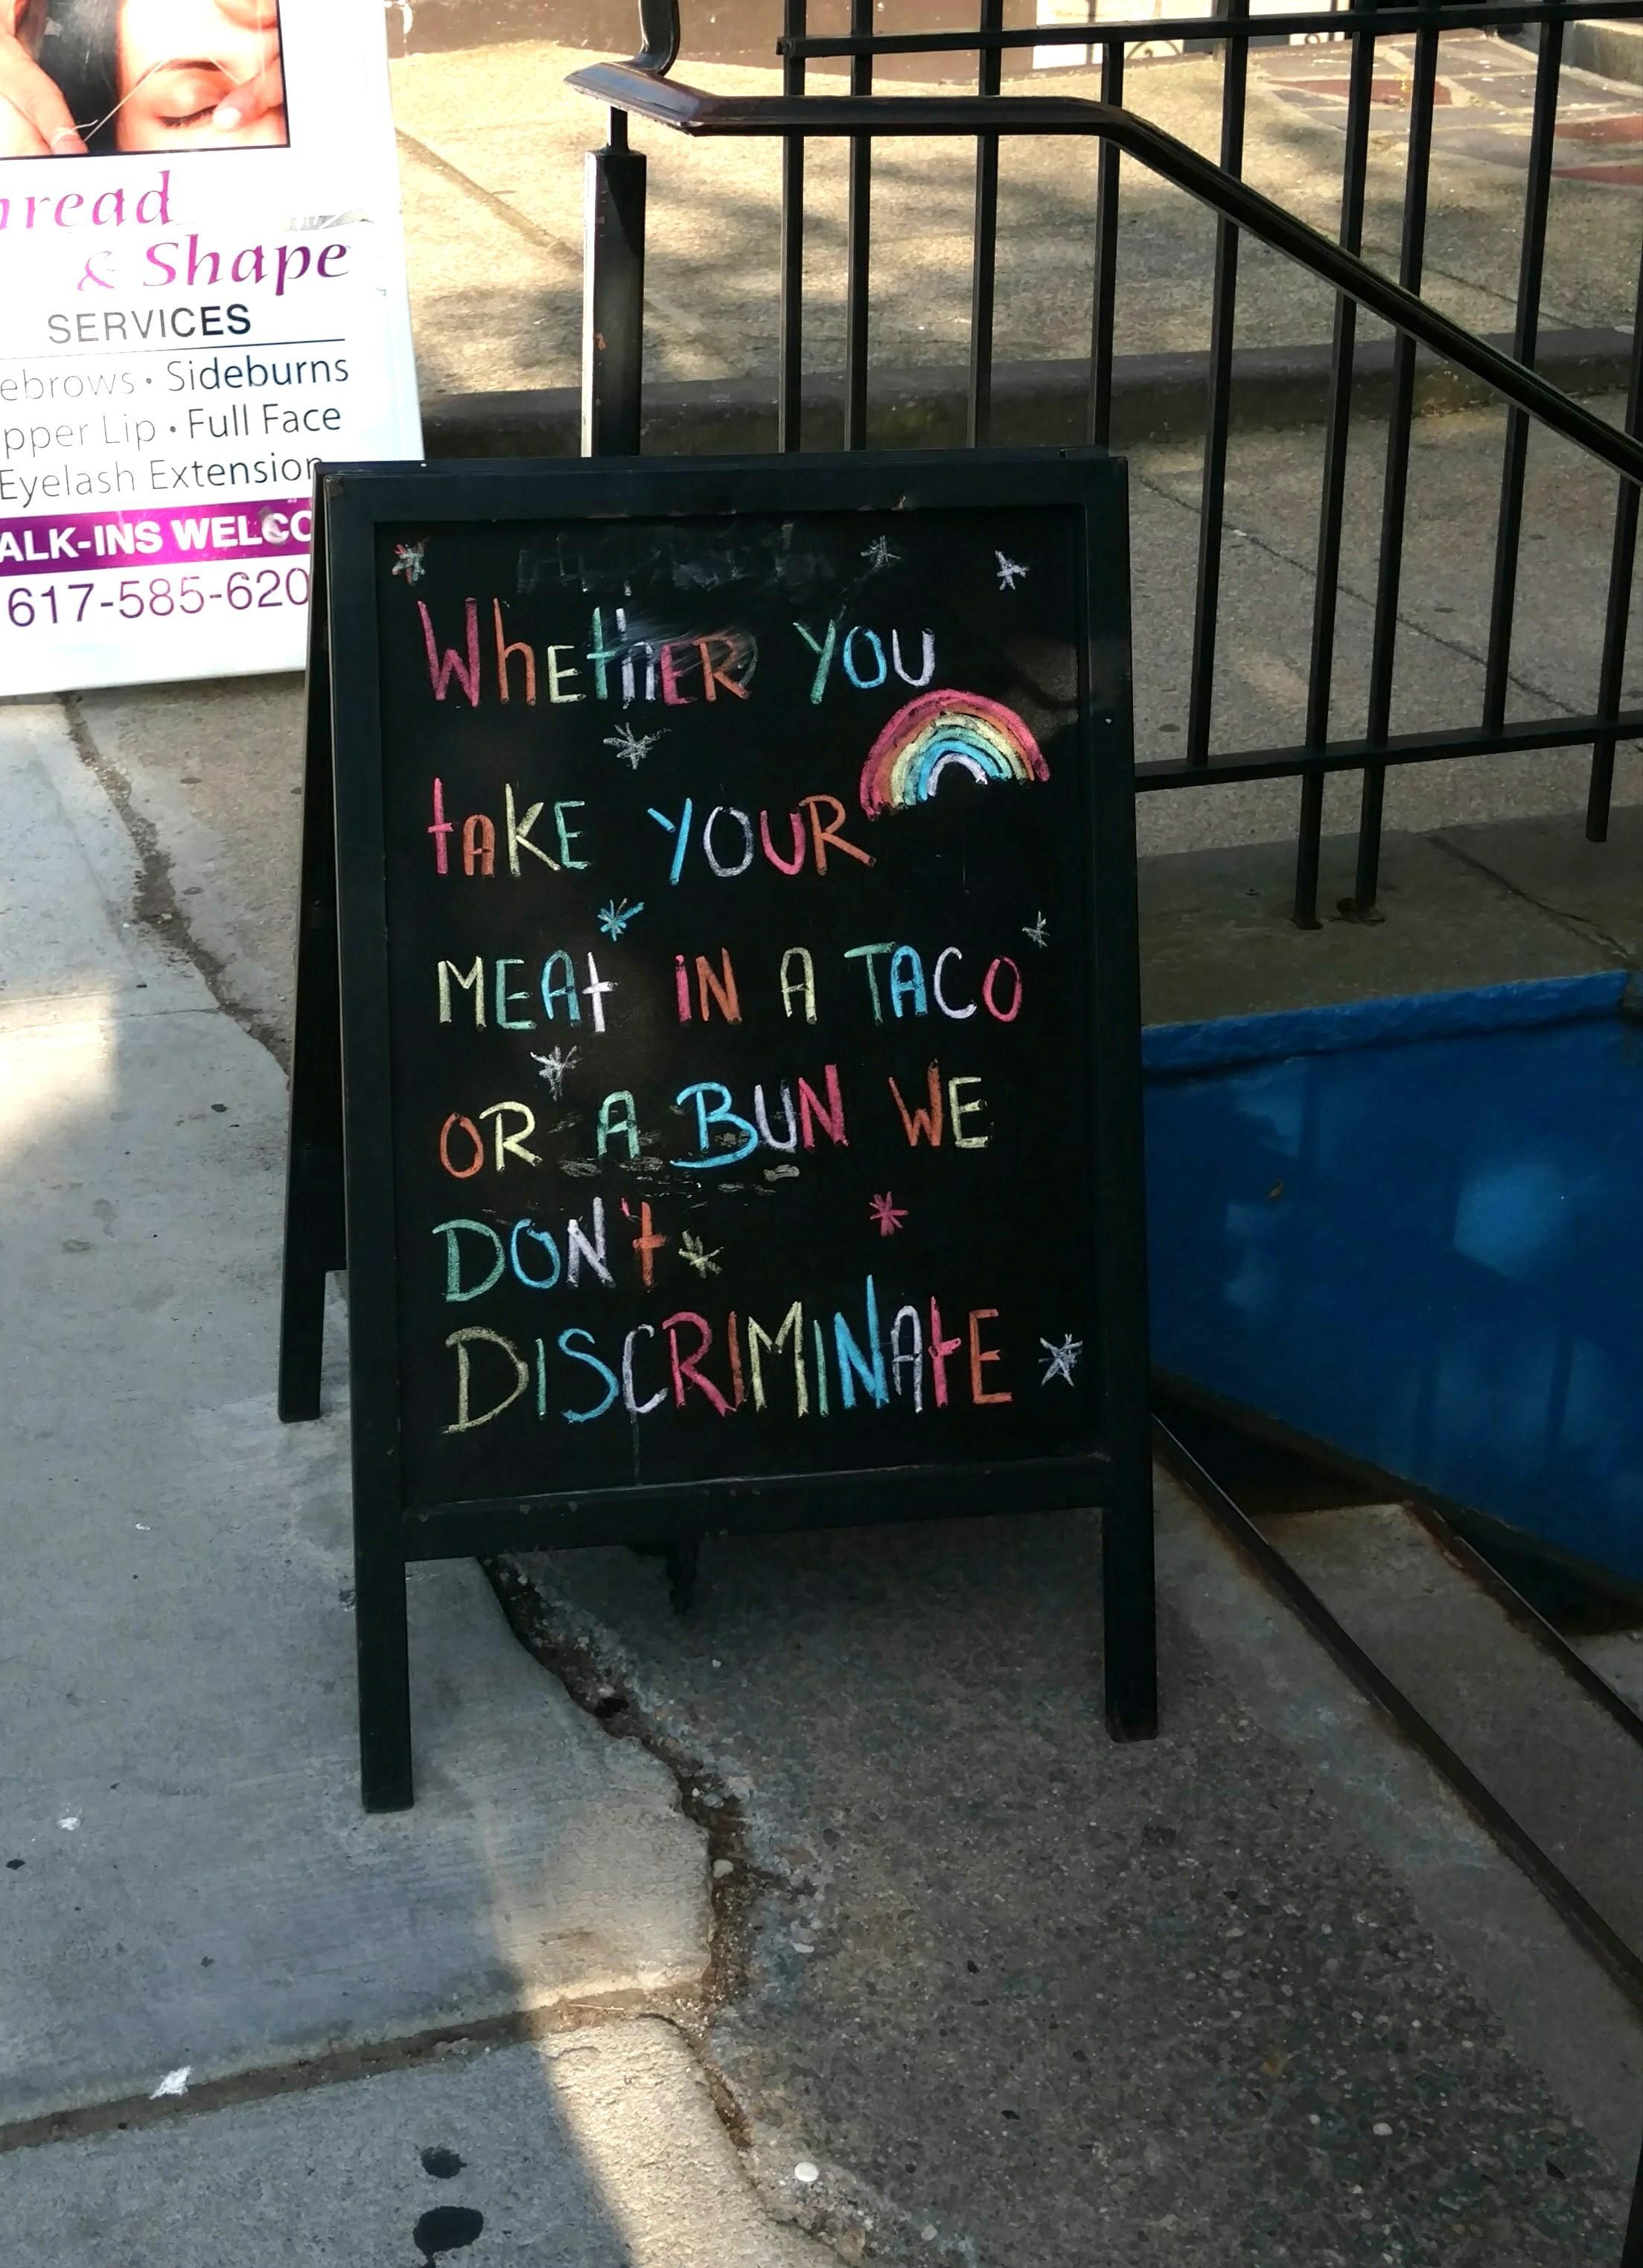 Where do you like your meat? Found this in front of a taco place in Boston during pride week